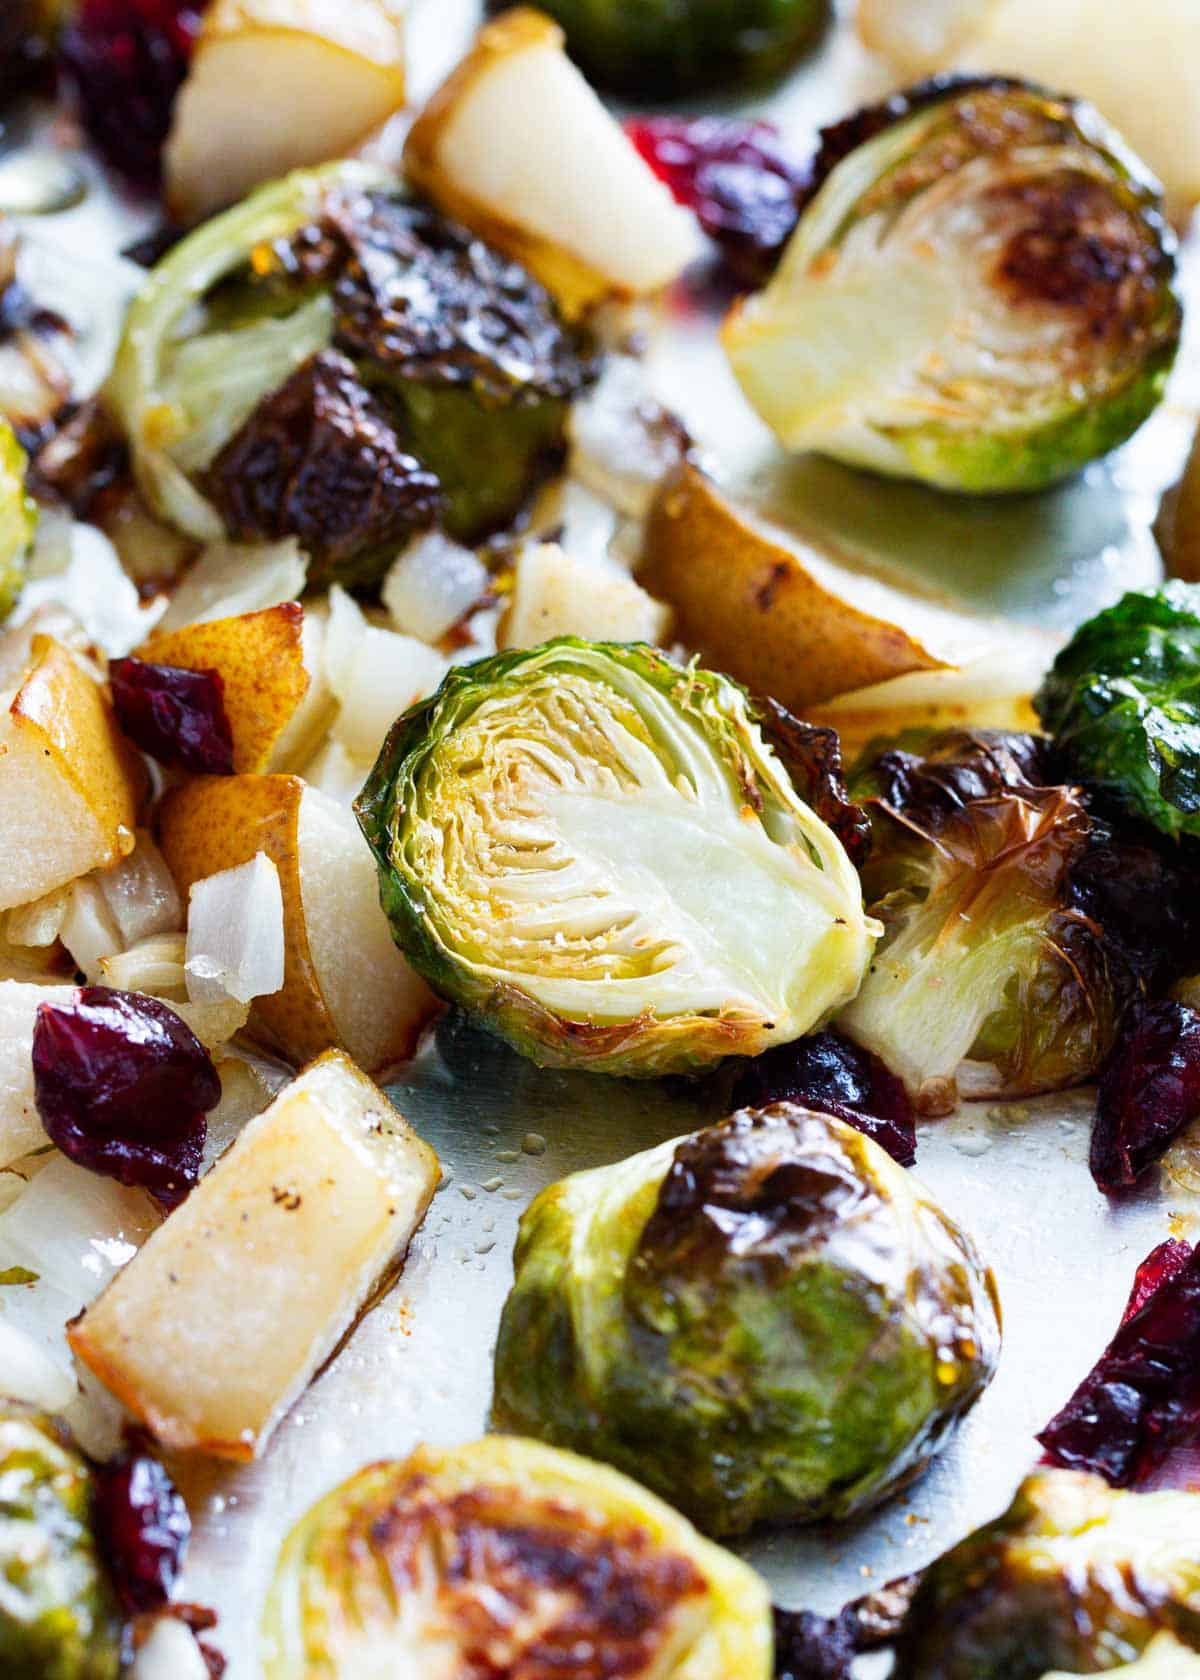 Roasted brussel sprouts with cranberries on pan.